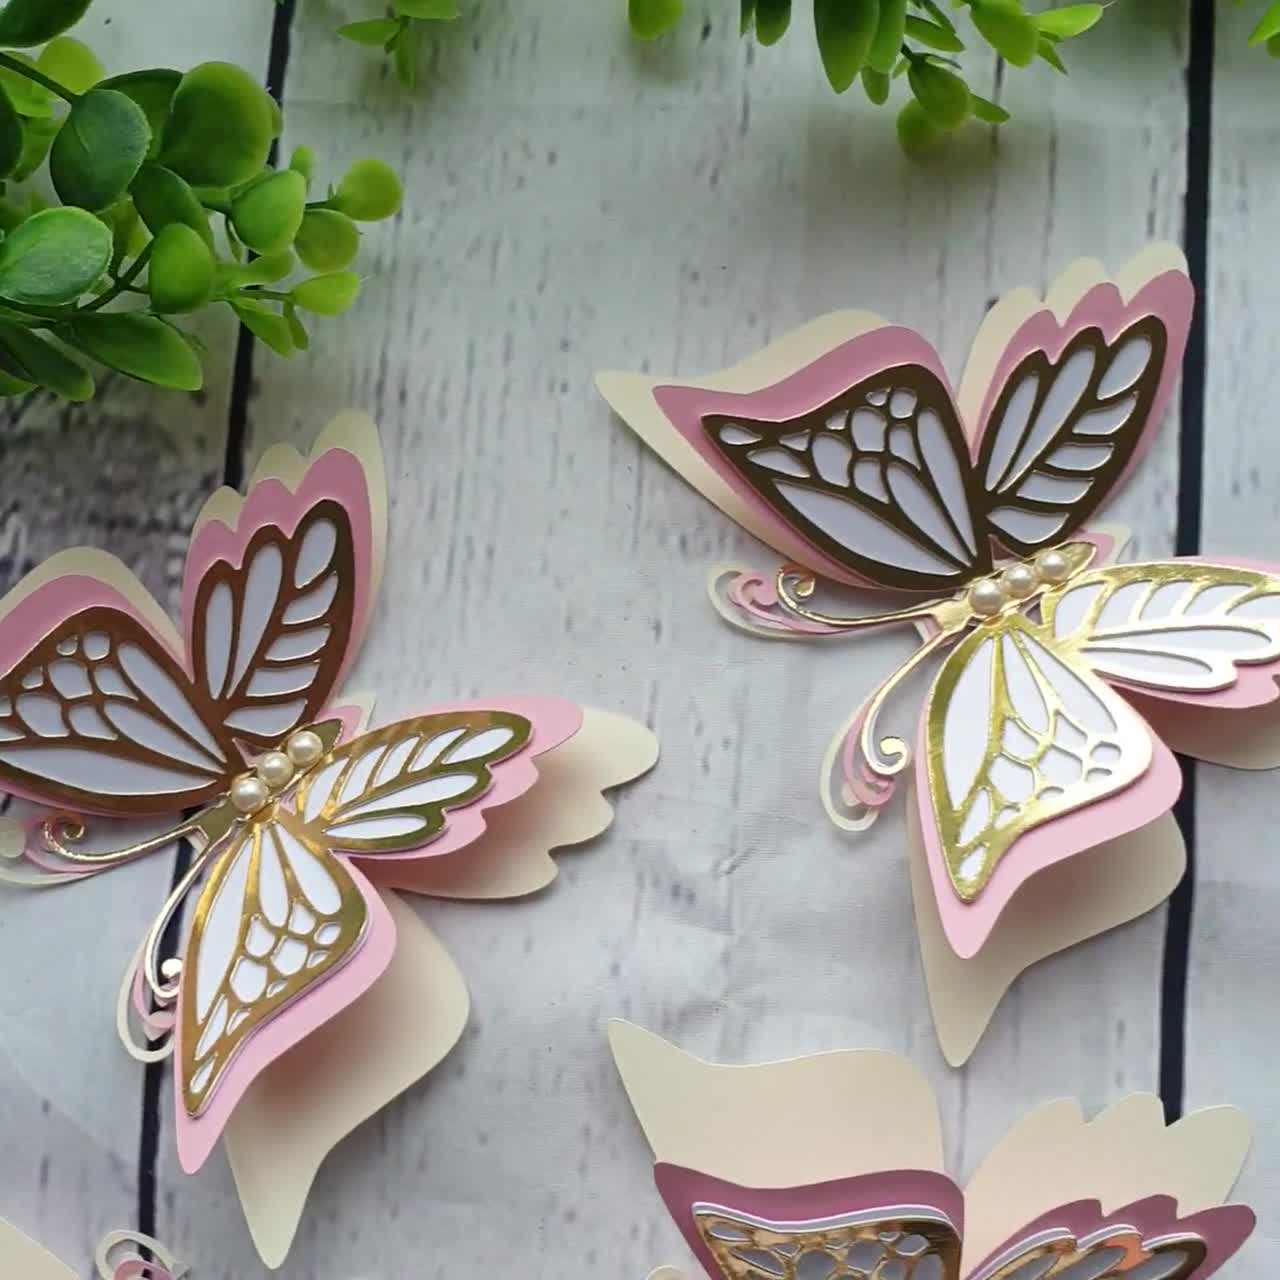 10 Natural 3D Butterflies Butterfly Picture Frames Home Wall Wedding  Decorations Scrap Booking Card Making DIY Hair Accessories Baby Shower 